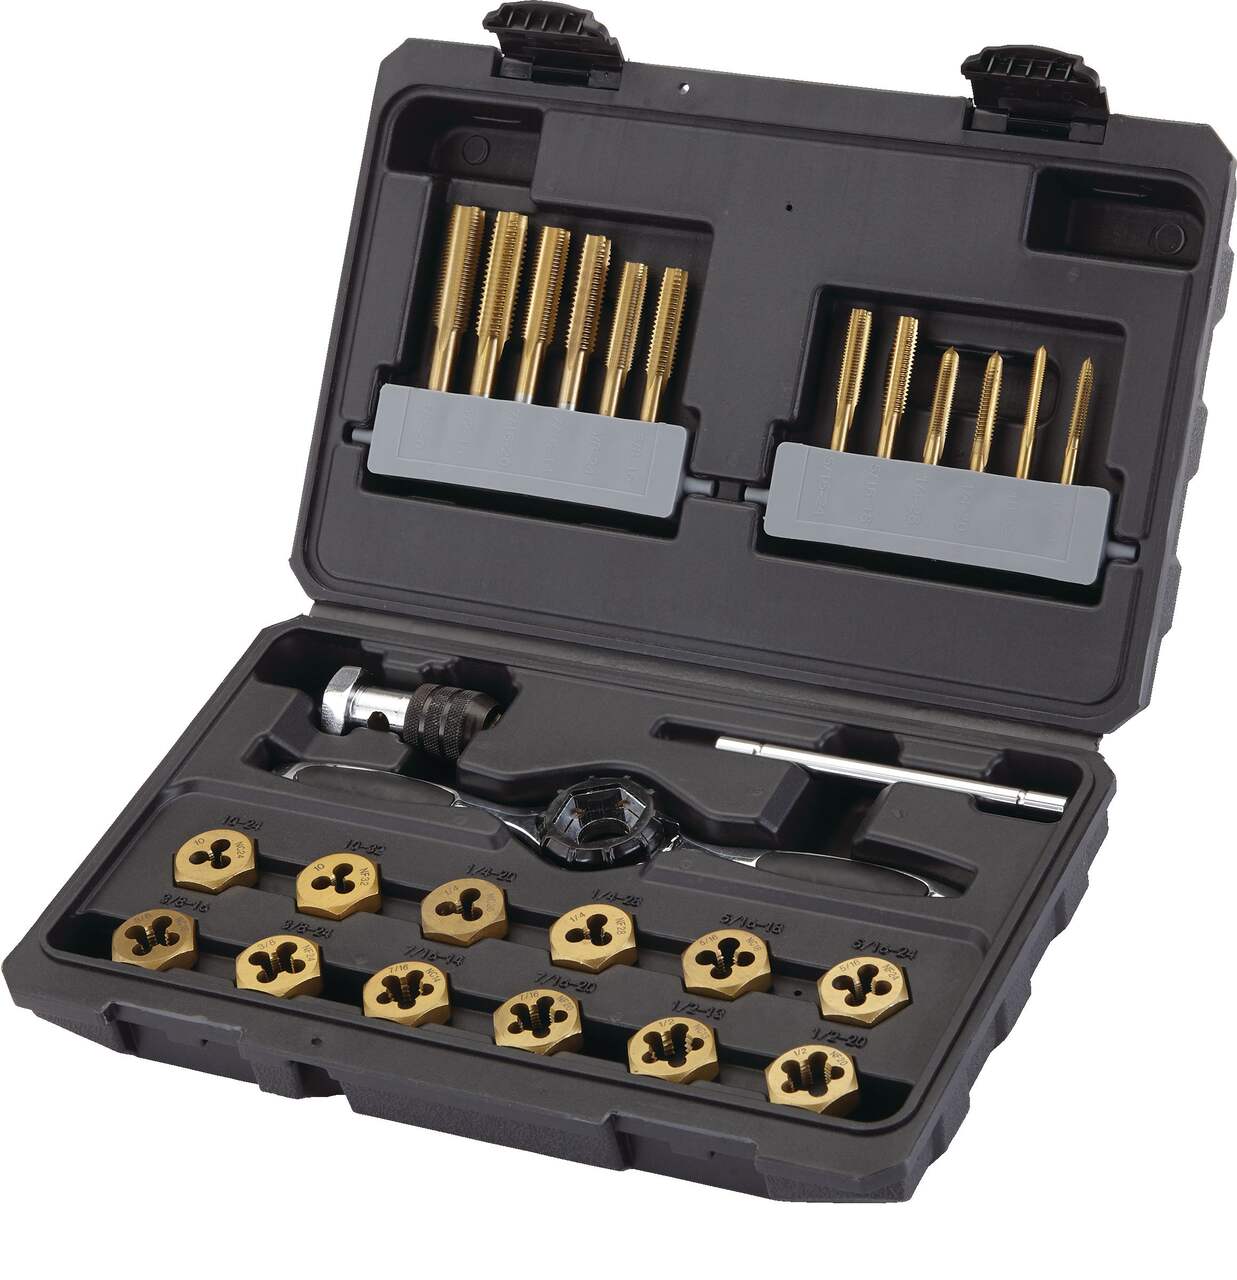 https://media-www.canadiantire.ca/product/fixing/tools/metal-working/0587215/maximum-26pc-tap-die-set-sae-2fc53e8a-dfa1-47c2-ae4b-3d252265ba99-jpgrendition.jpg?imdensity=1&imwidth=640&impolicy=mZoom